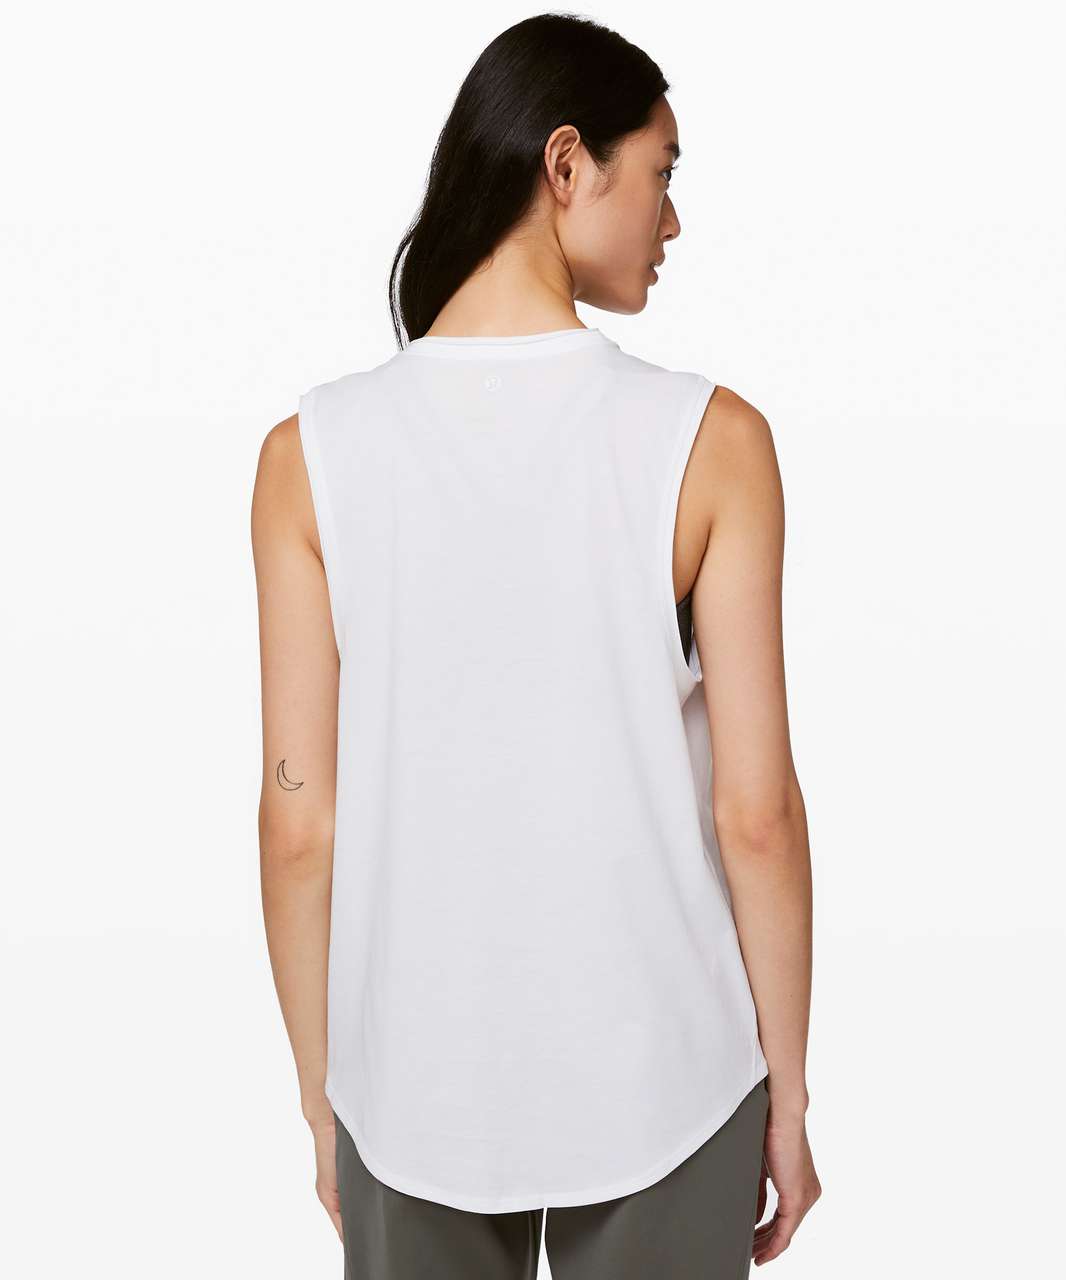 Lululemon Show Your Edge Muscle Tank - White